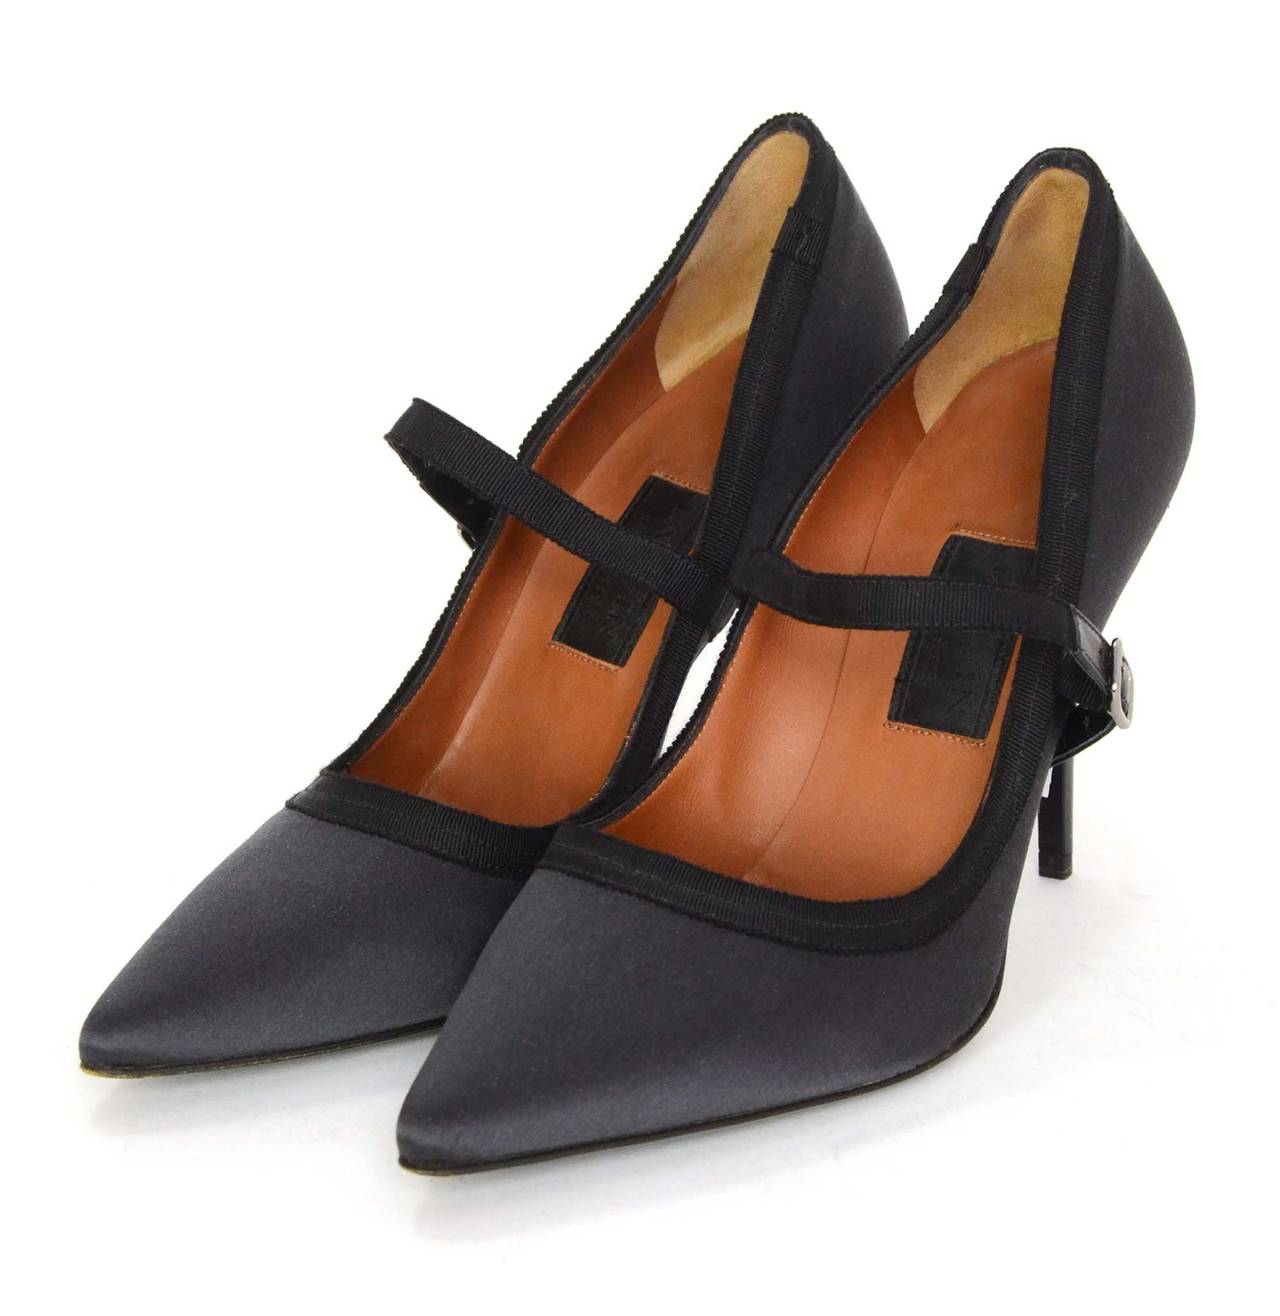 Lanvin Grey Satin Mary-Jane Pumps
Features black trim
Made in: Italy
Color: Grey and black
Composition: Satin
Sole Stamp: Vero Cuoio Made in Italy 38 1/2
Closure/opening: Slide on with mary-jane strap and buckle
Overall Condition: Excellent